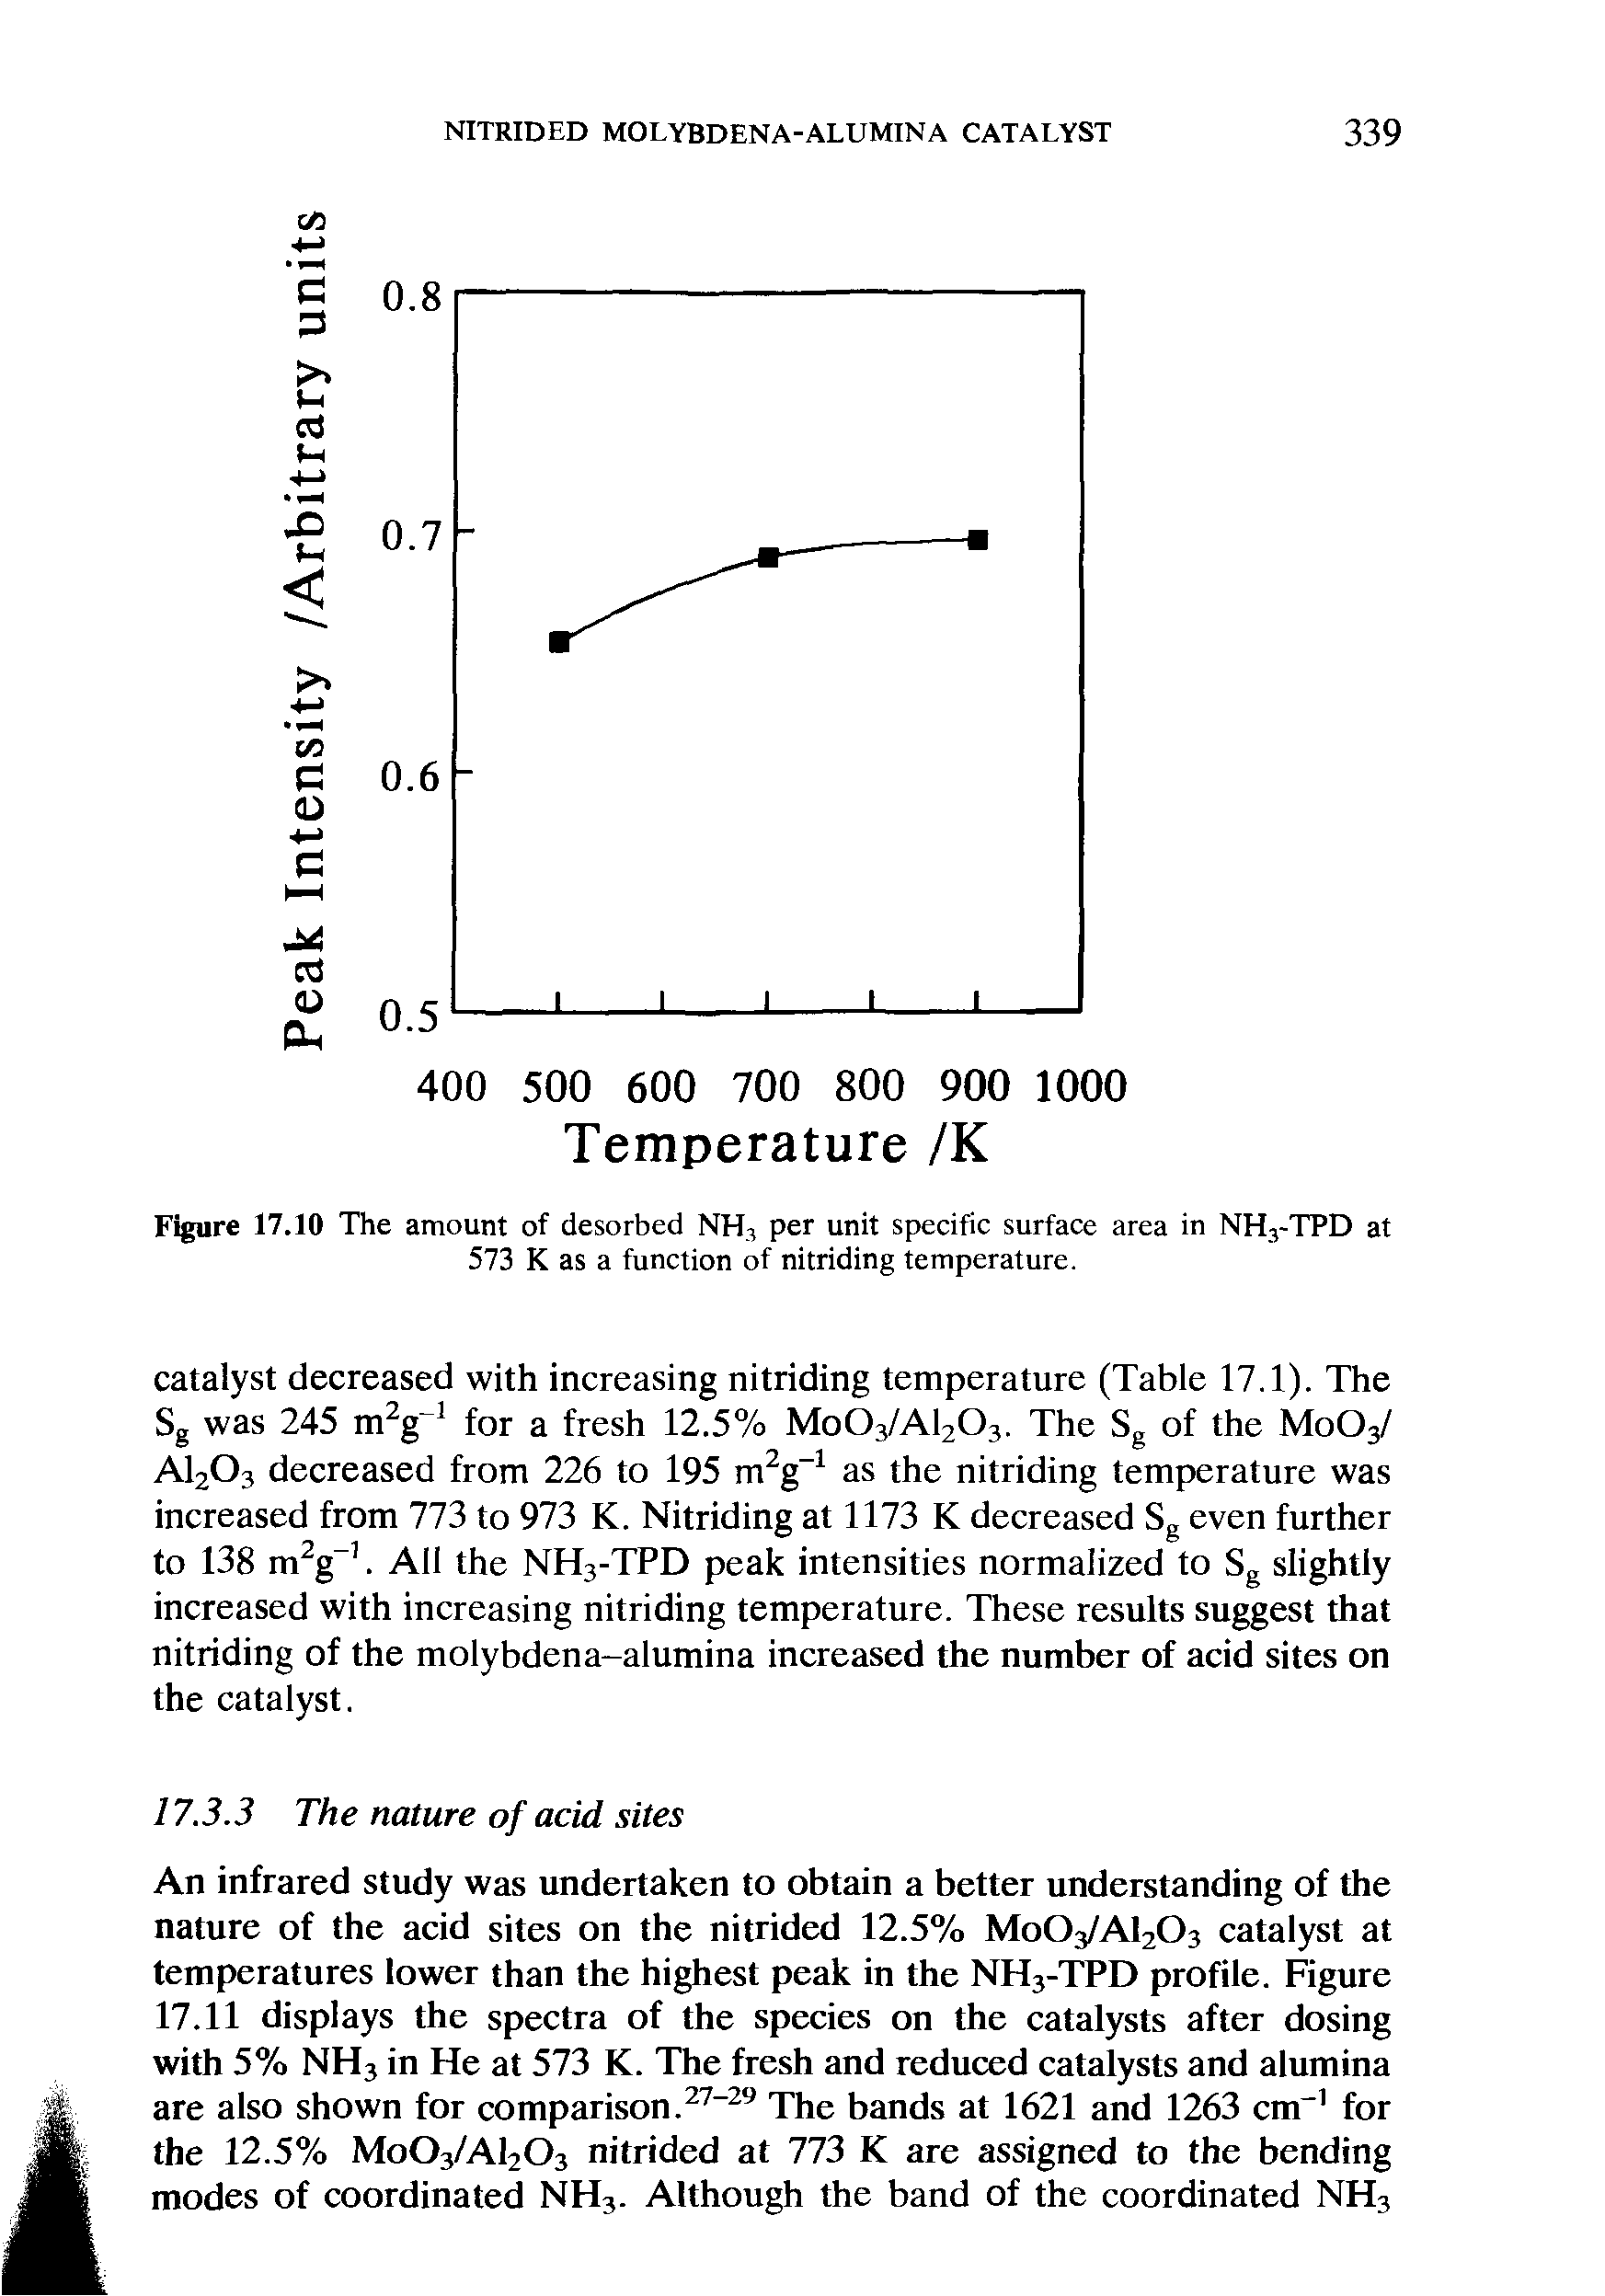 Figure 17.10 The amount of desorbed NH, per unit specific surface area in NHrTPD at 573 K as a function of nitriding temperature.